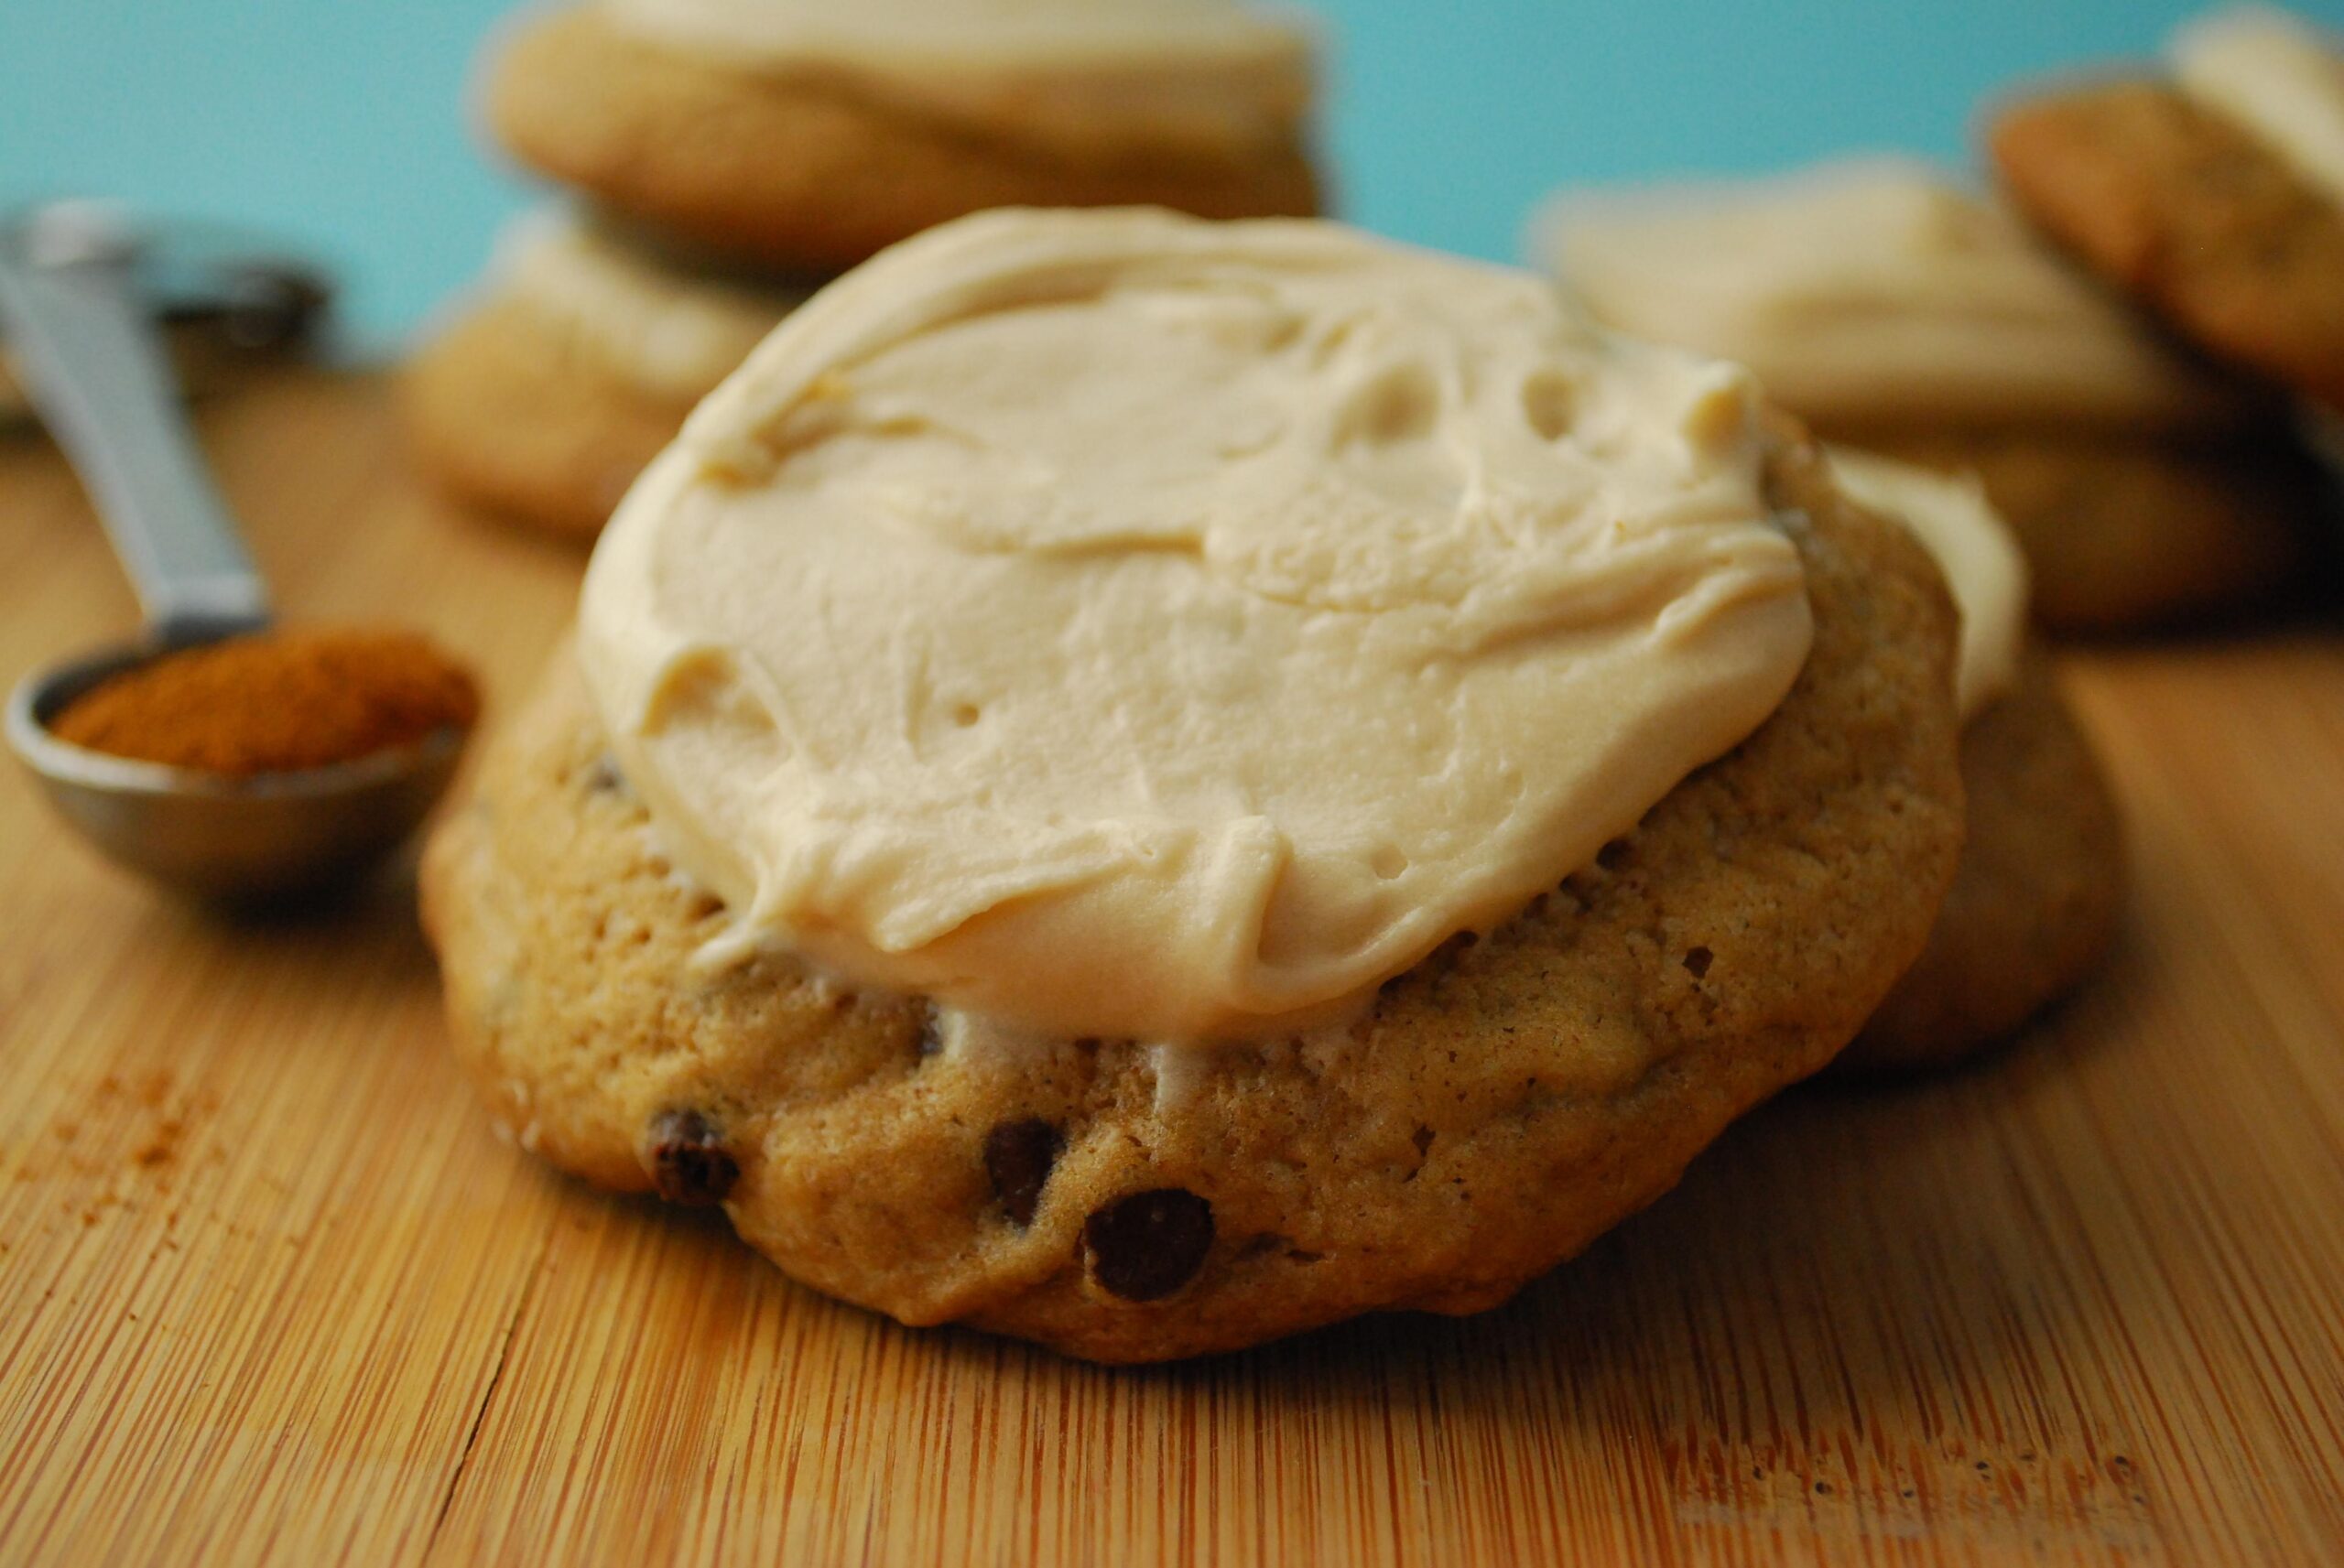  These Mocha Cookies are the perfect sweet treat for coffee lovers.